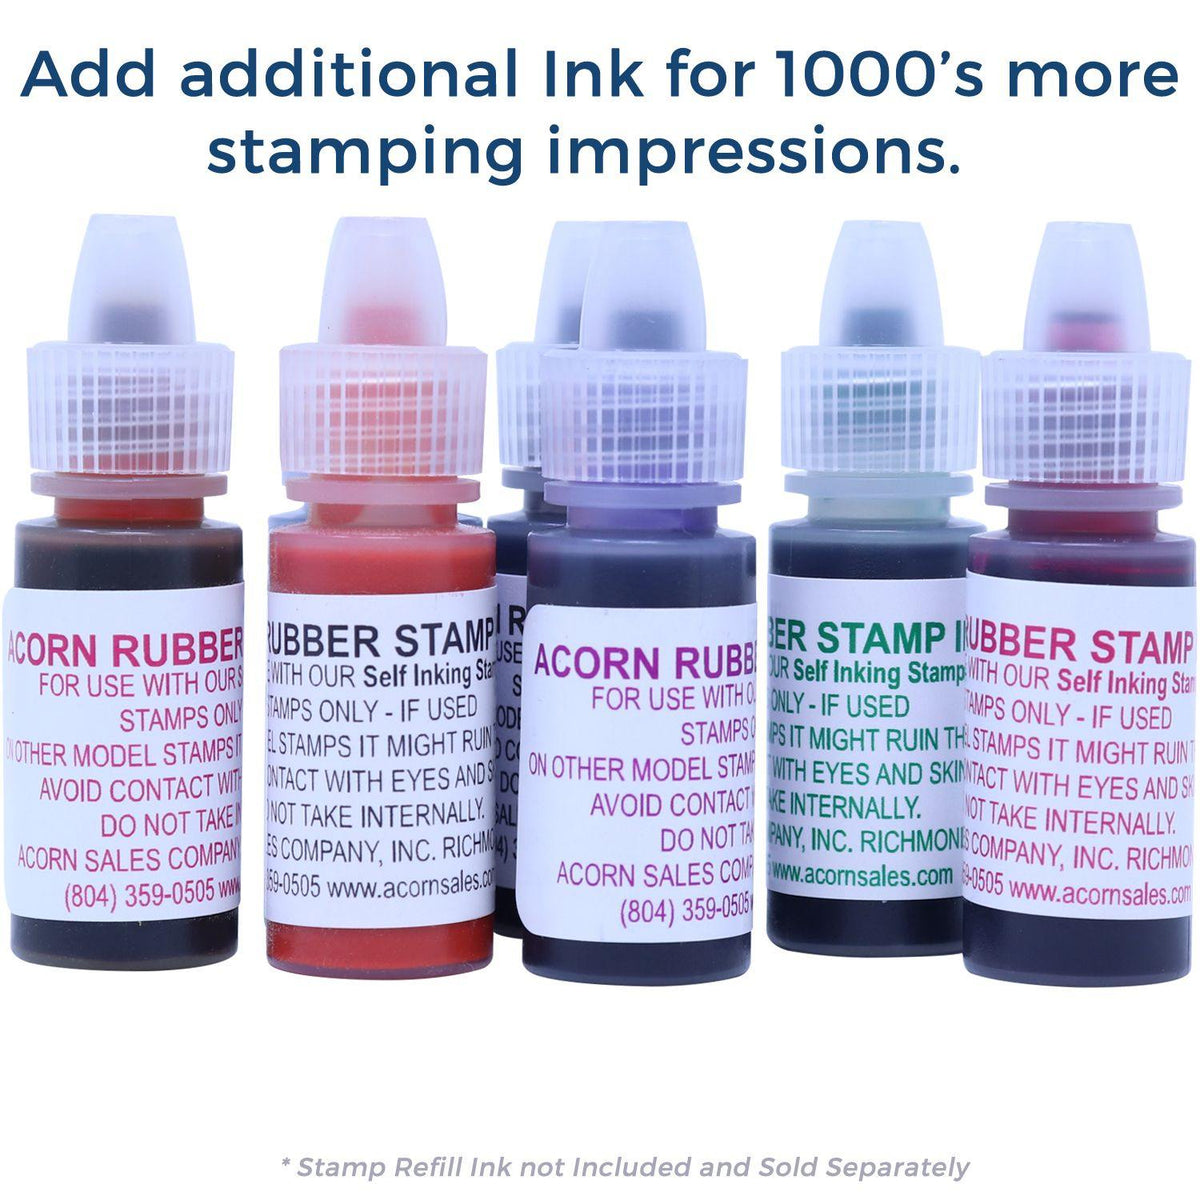 Refill Inks for Large Pre-Inked Rush with Rabbit Stamp Available